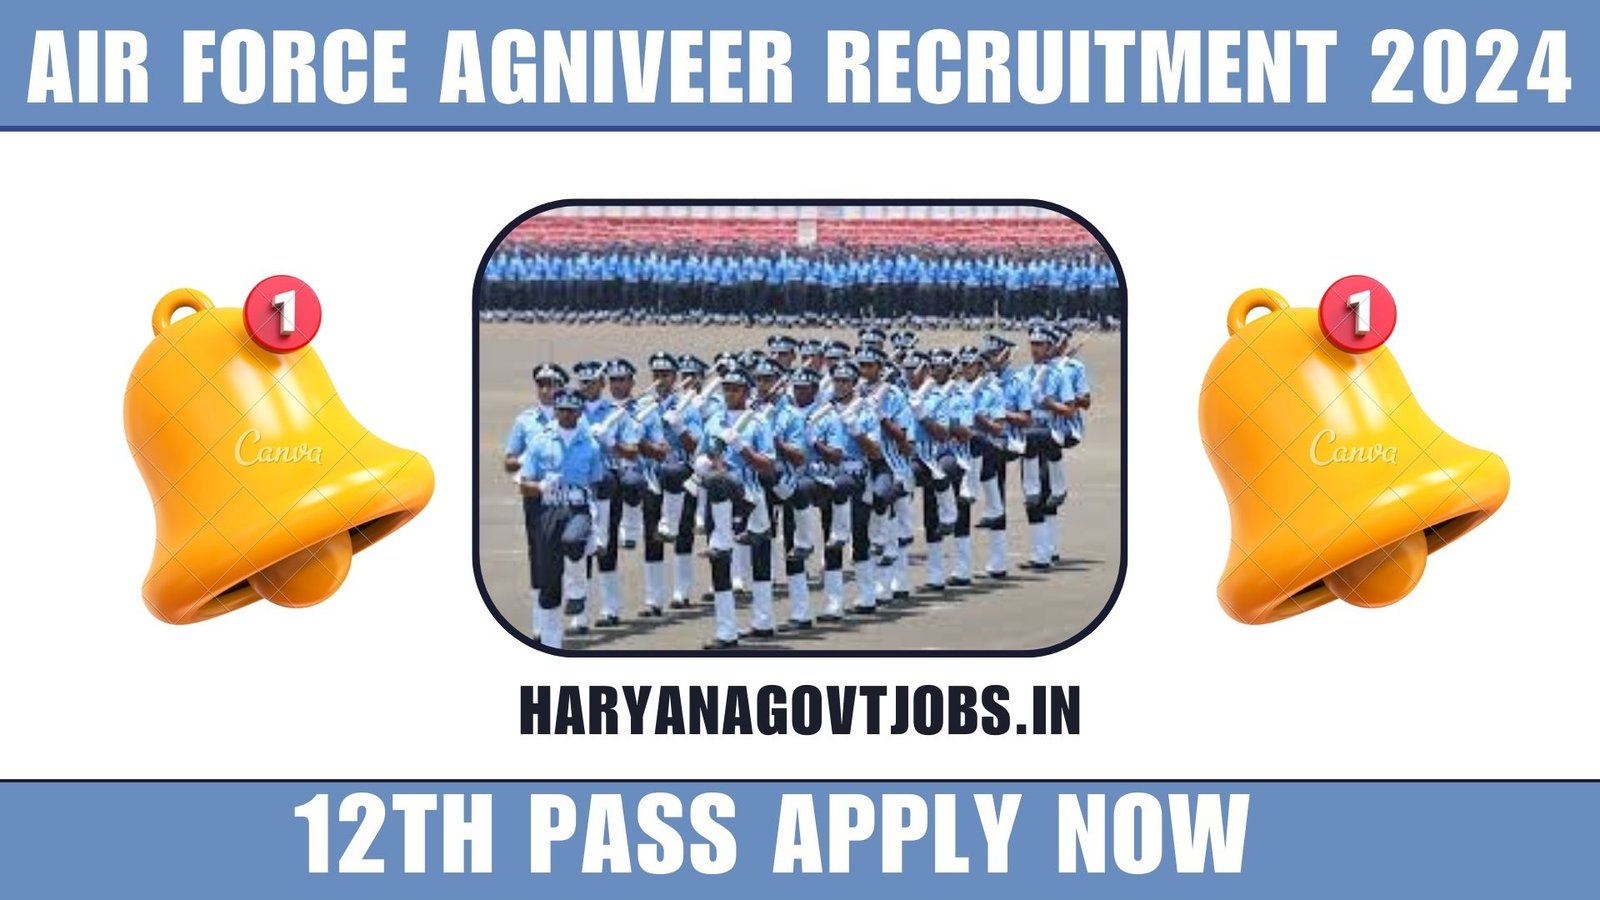 Air Force Agniveer Intake 02/2025 Notice Out, Apply Online